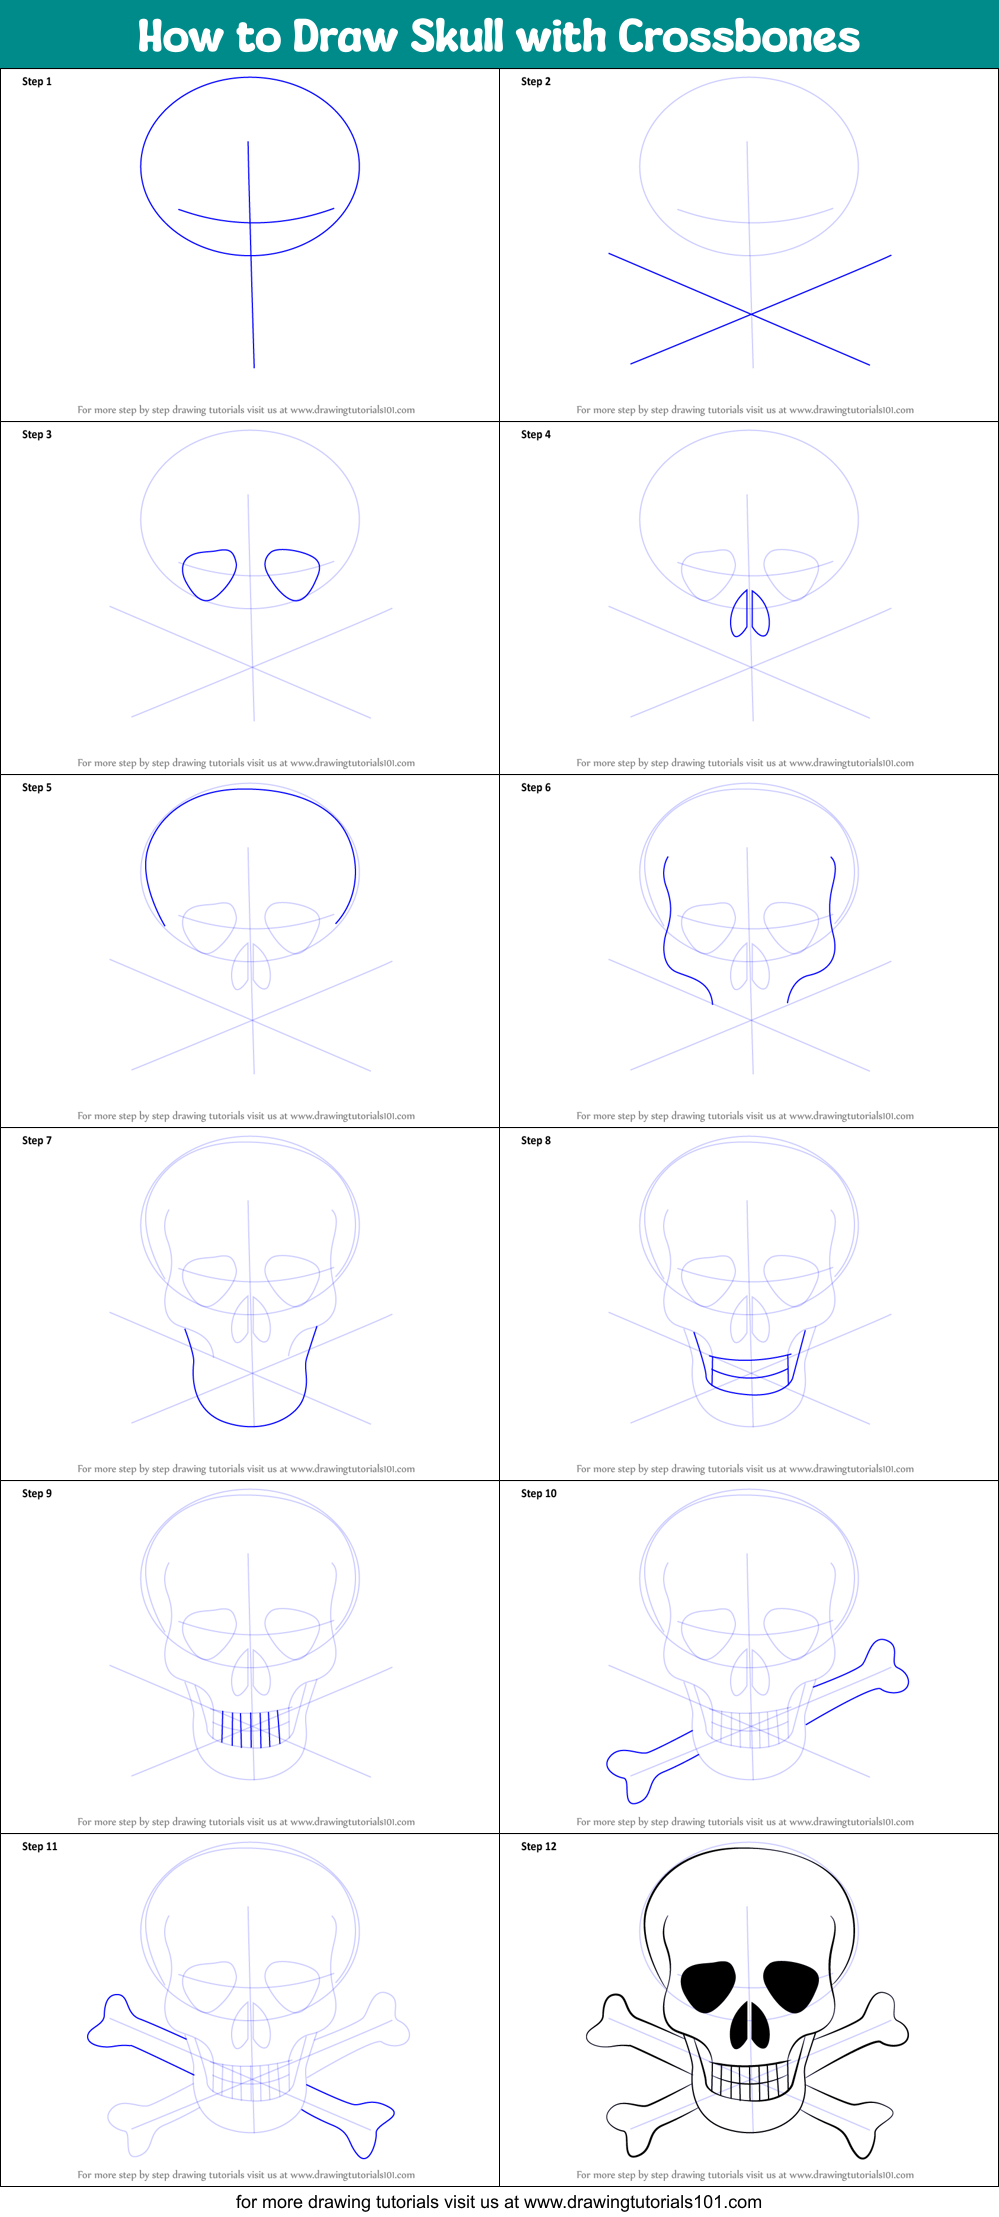 How to Draw Skull with Crossbones printable step by step drawing sheet